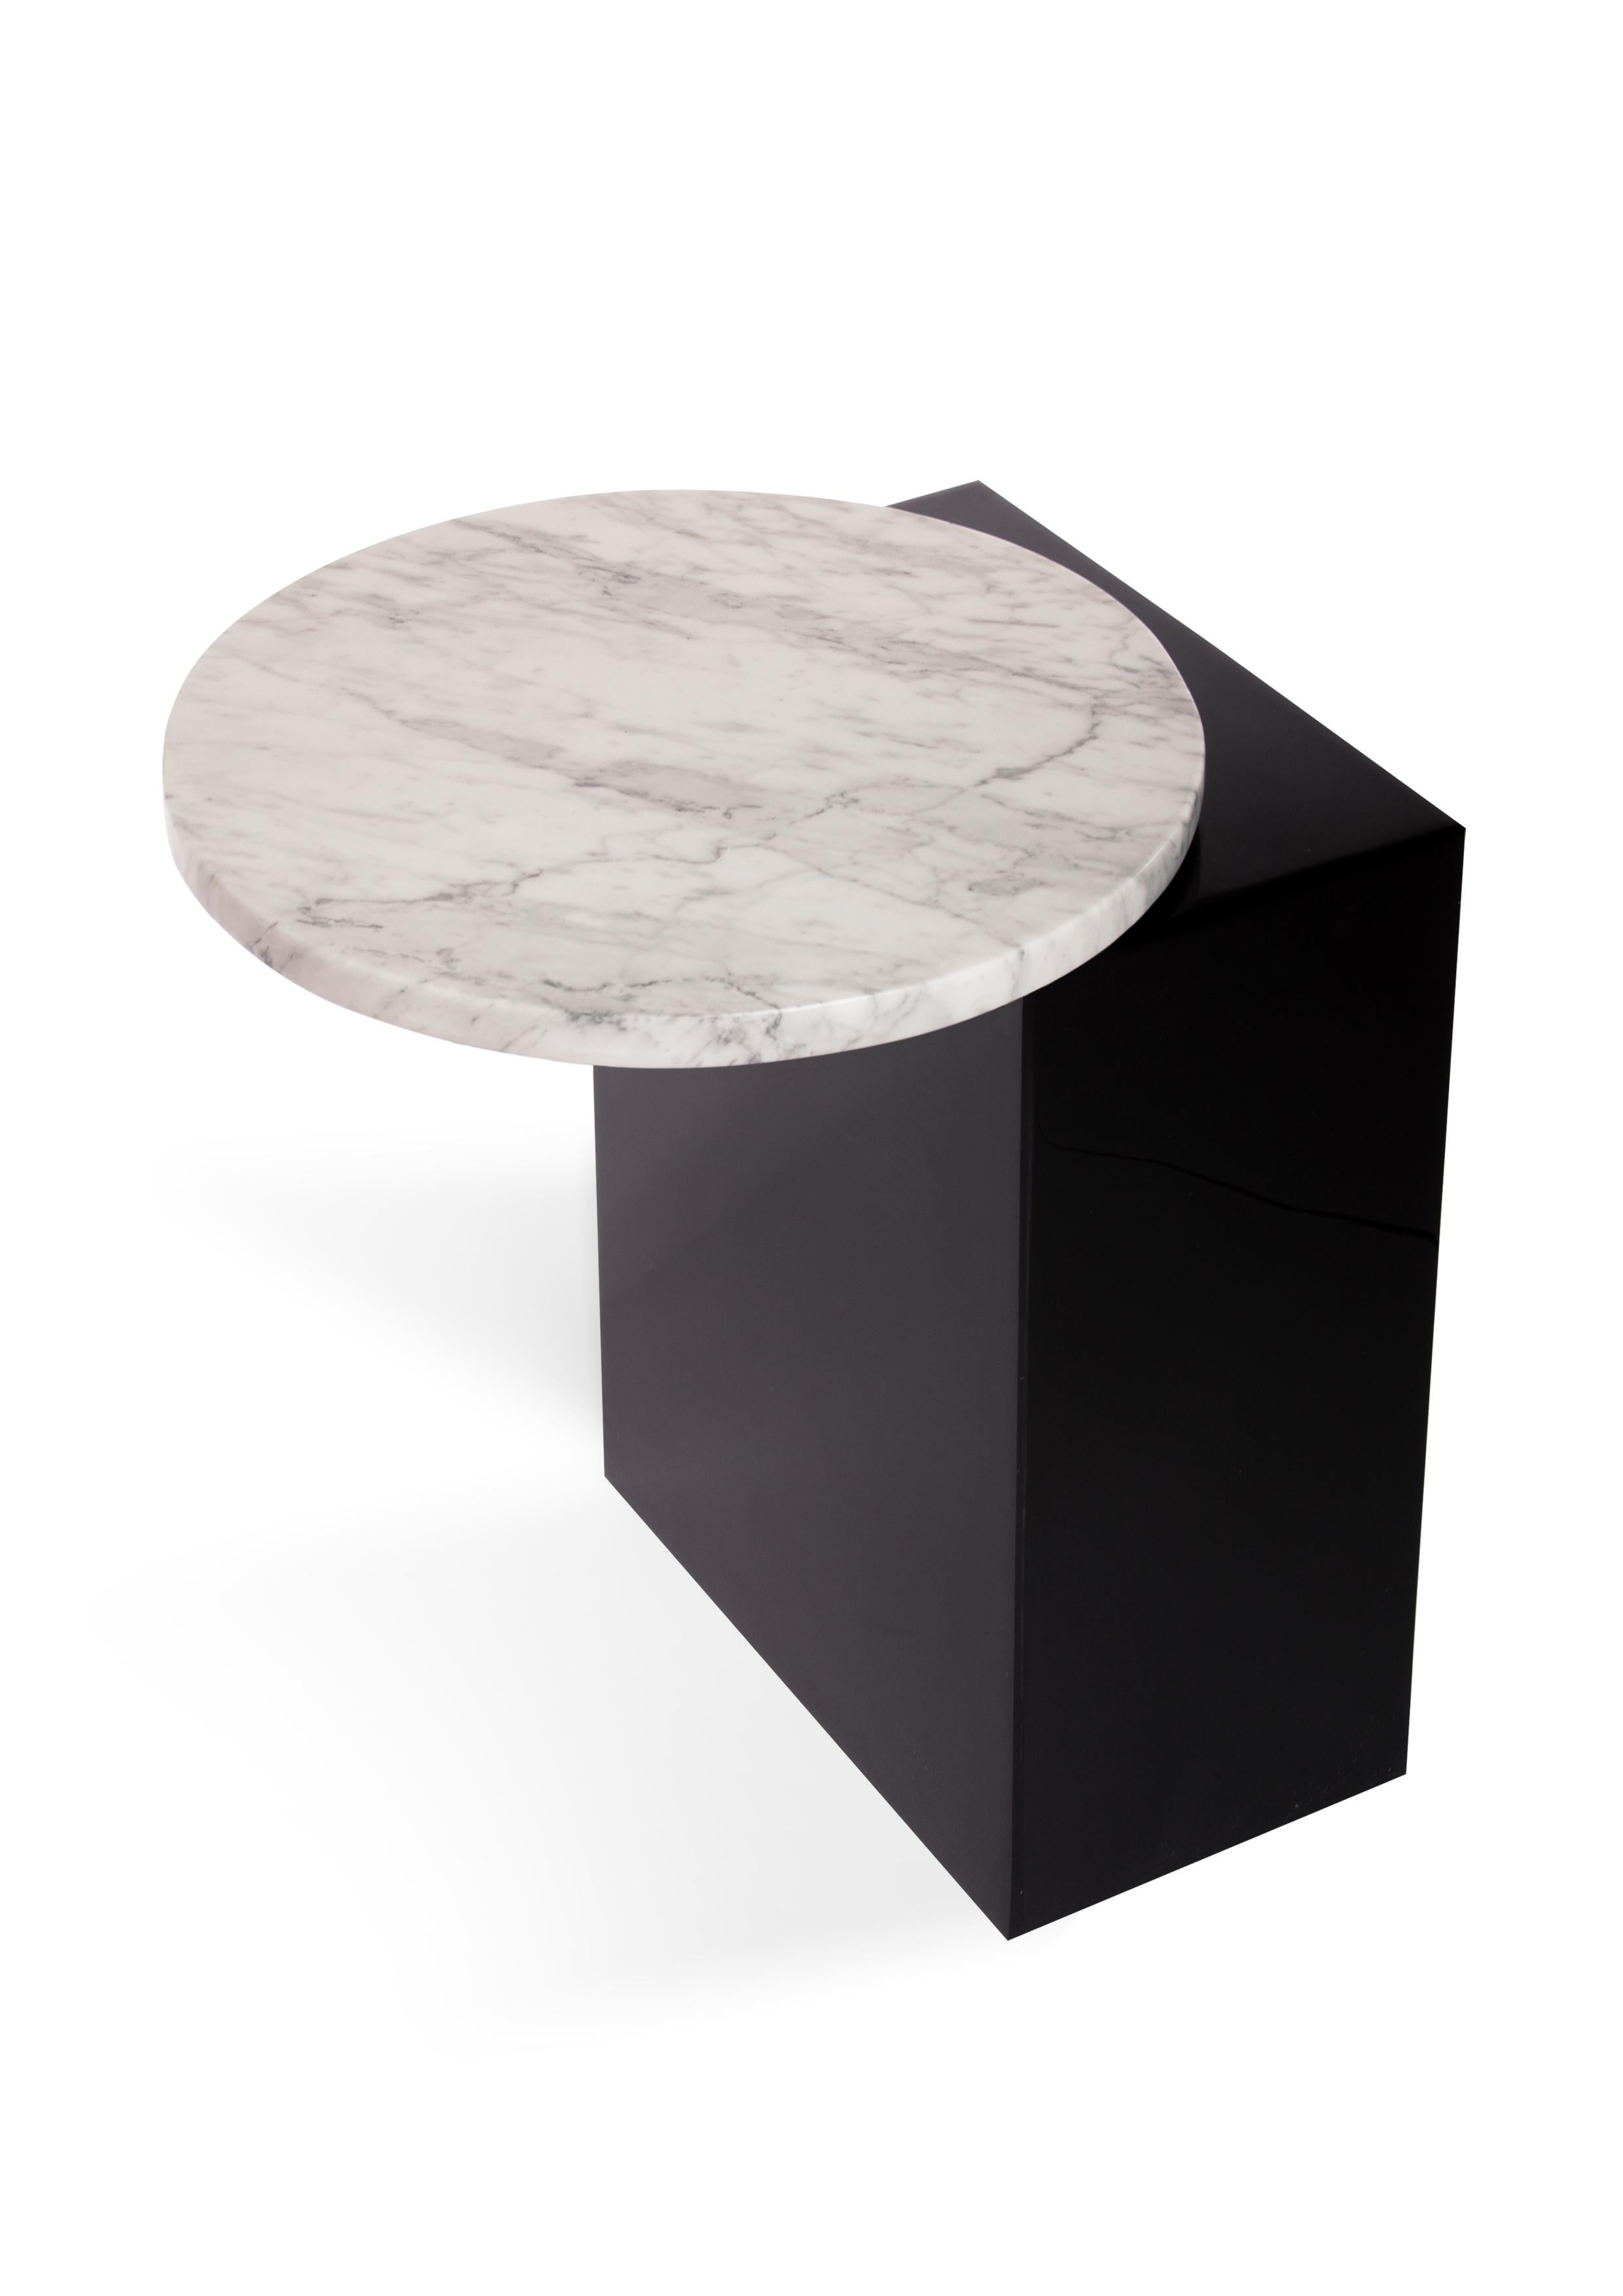 Organic Modern Configurable Geometry II Side Table by Sten Studio, REP by Tuleste Factory For Sale